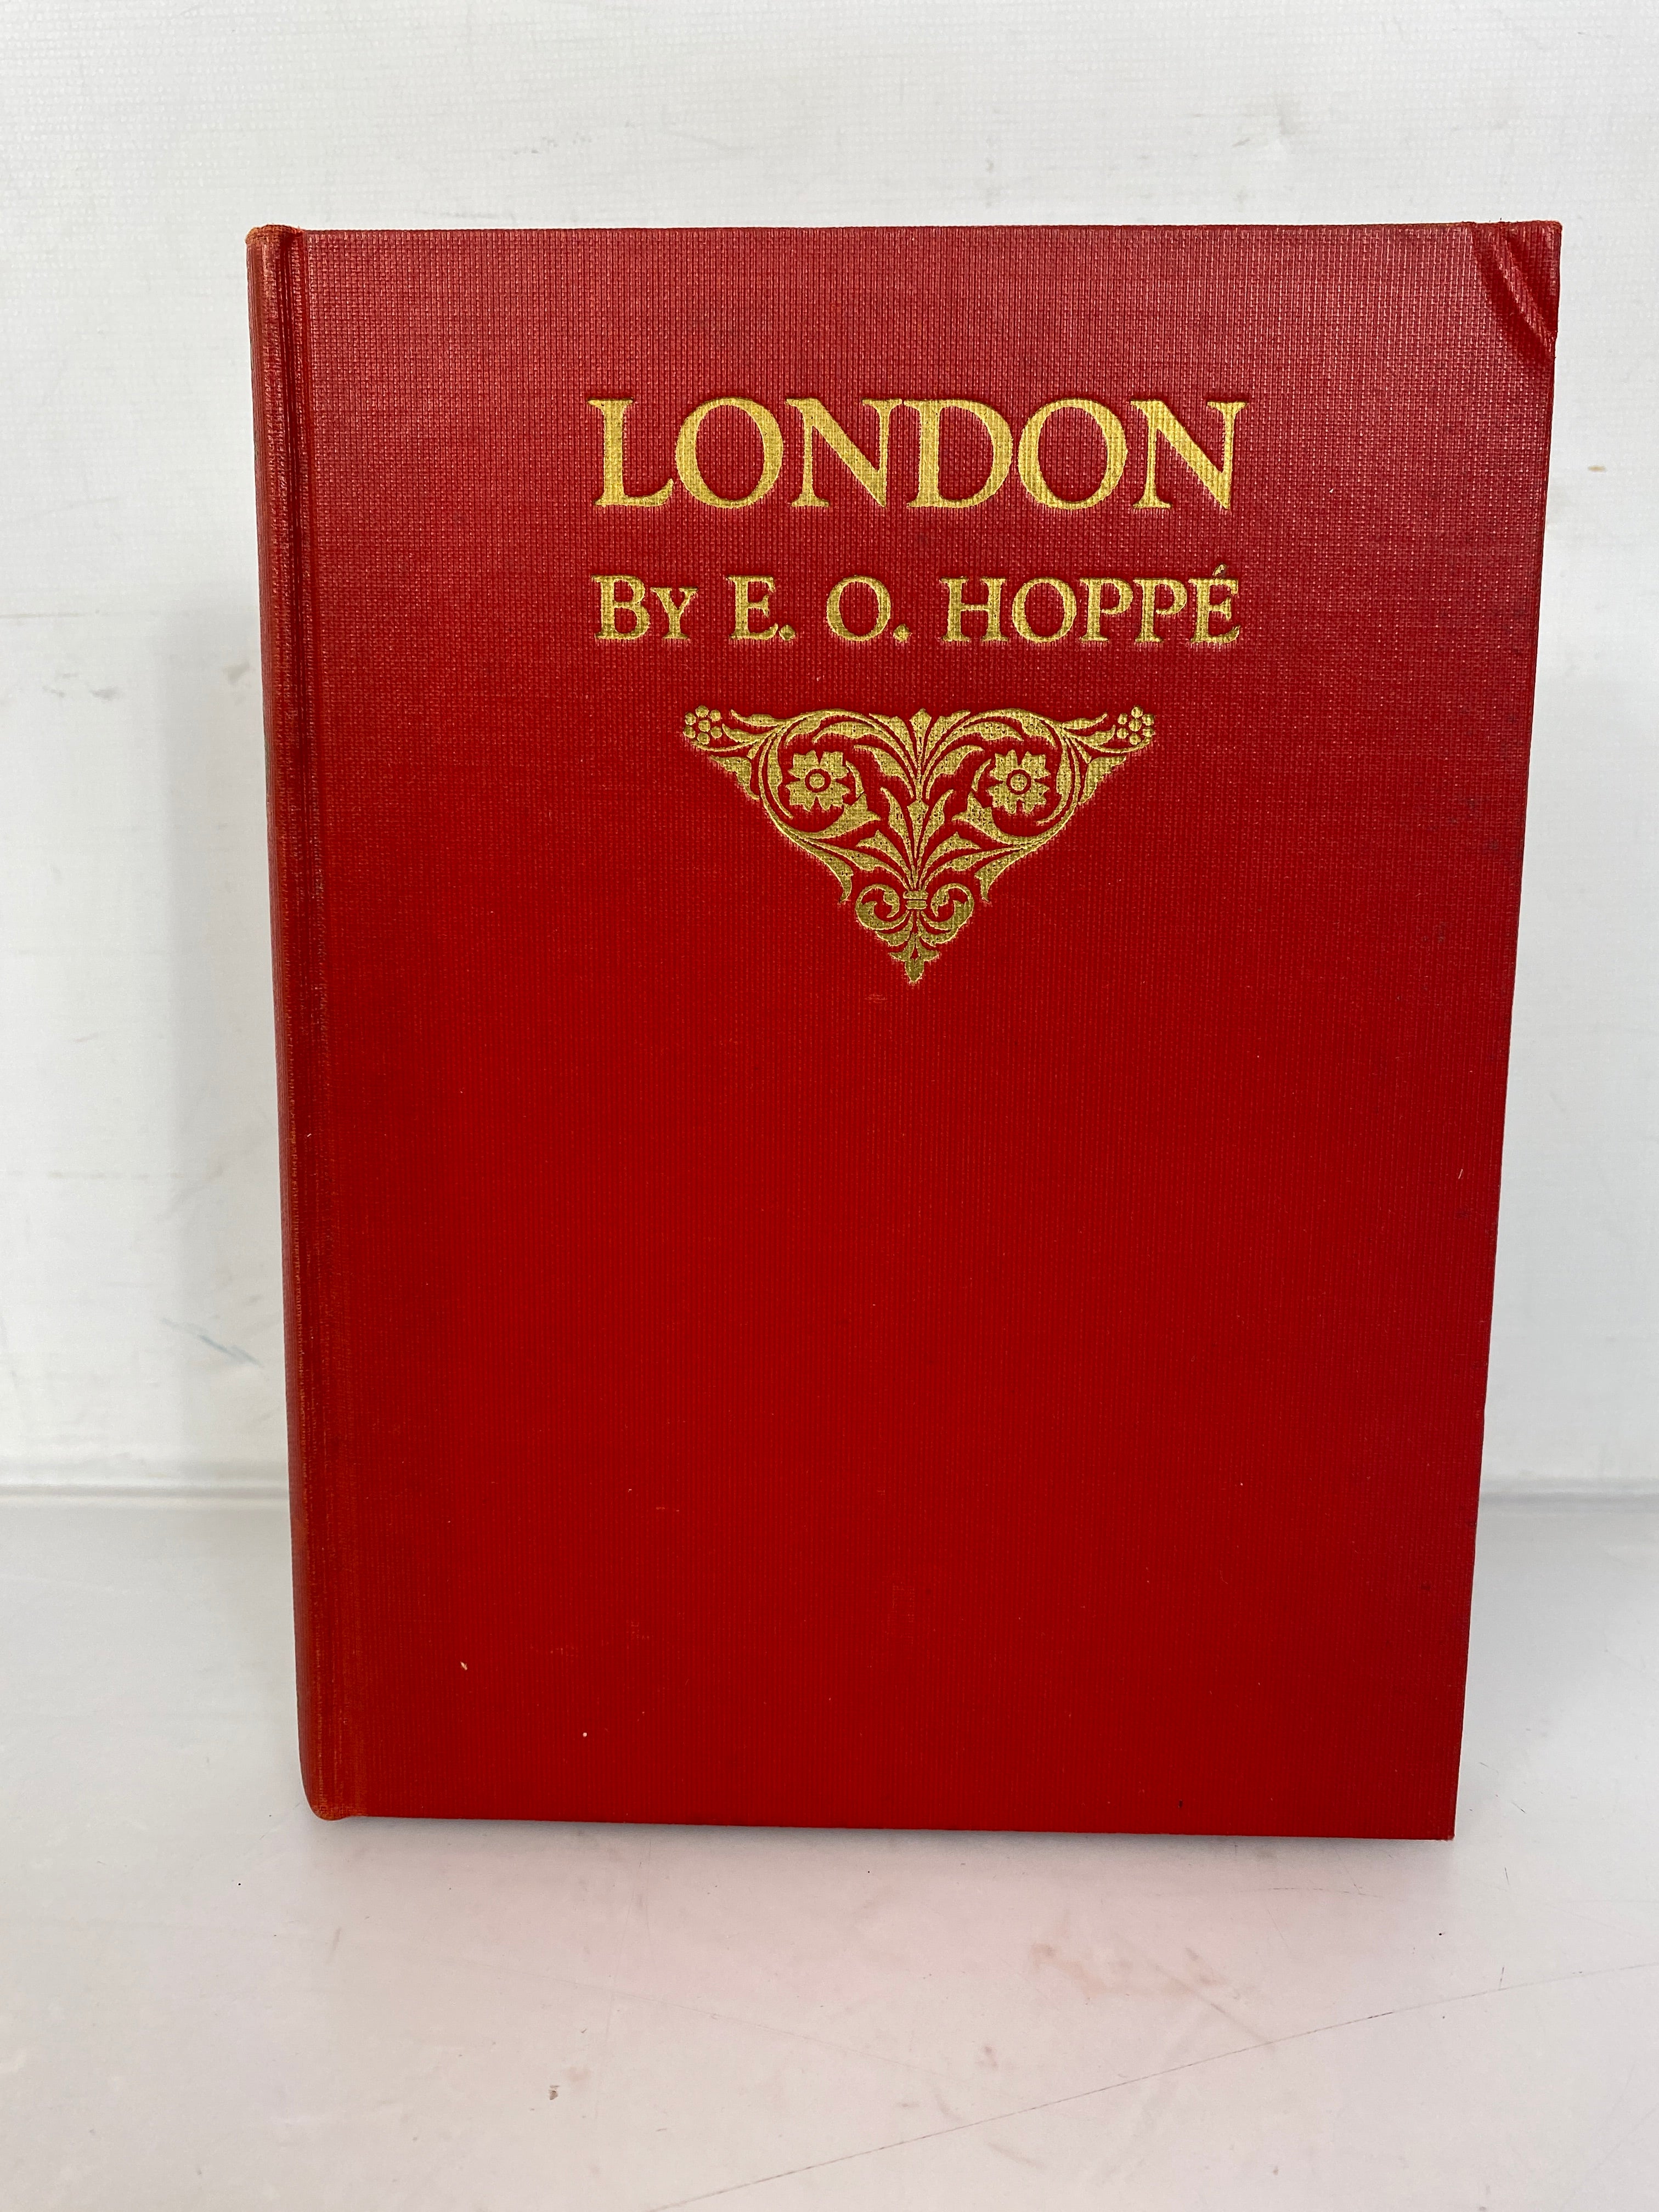 Vintage London by E.O. Hoppe The Picture Guides The Medici Society 1932 HC